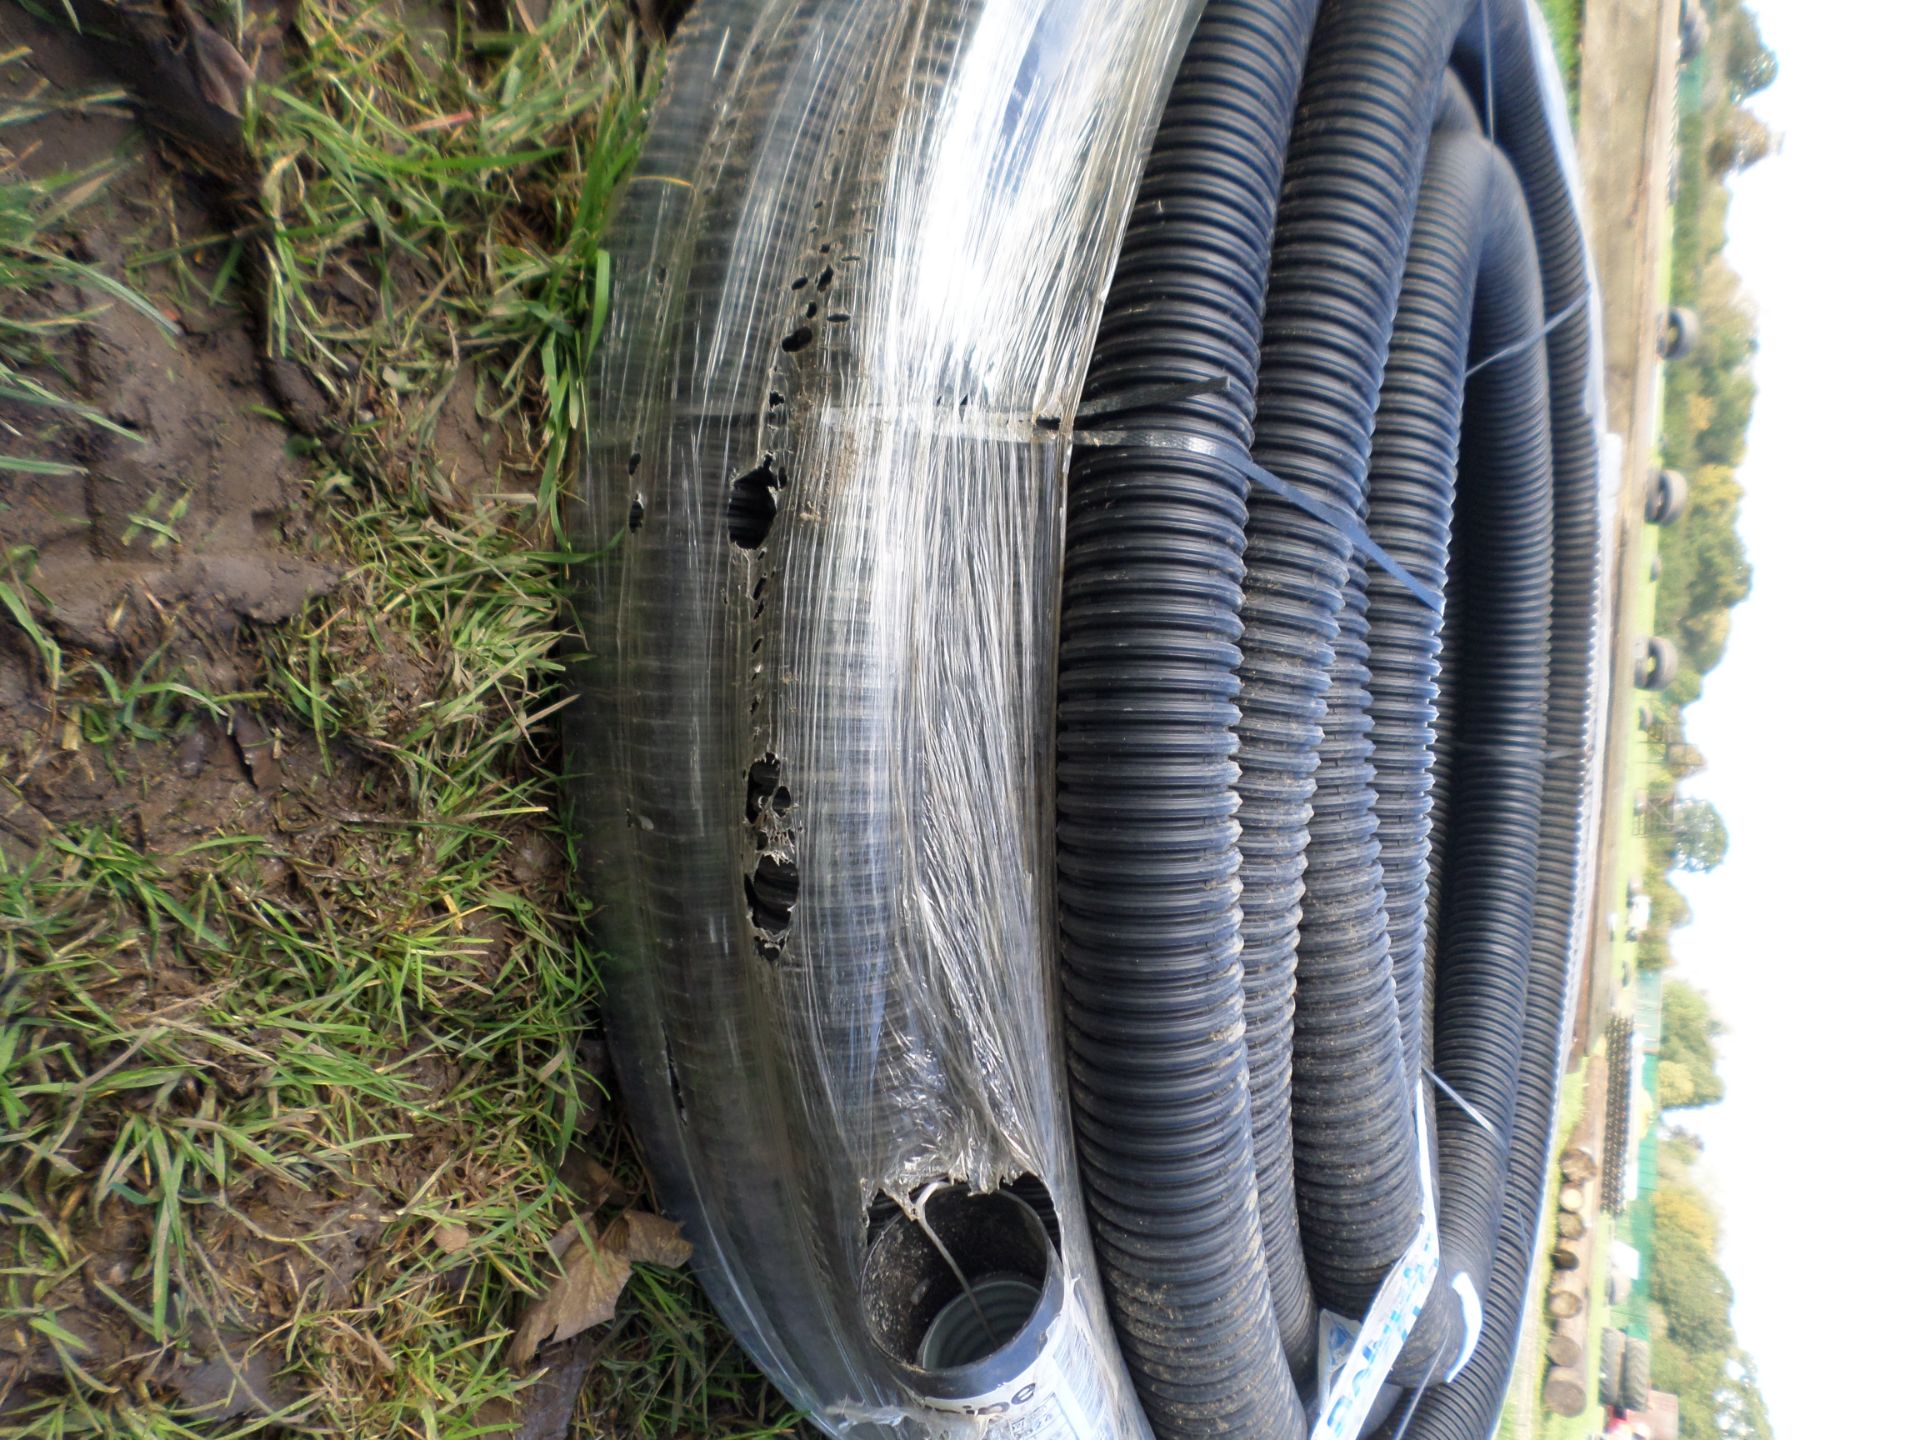 Coil of ducting NO VAT - Image 2 of 2